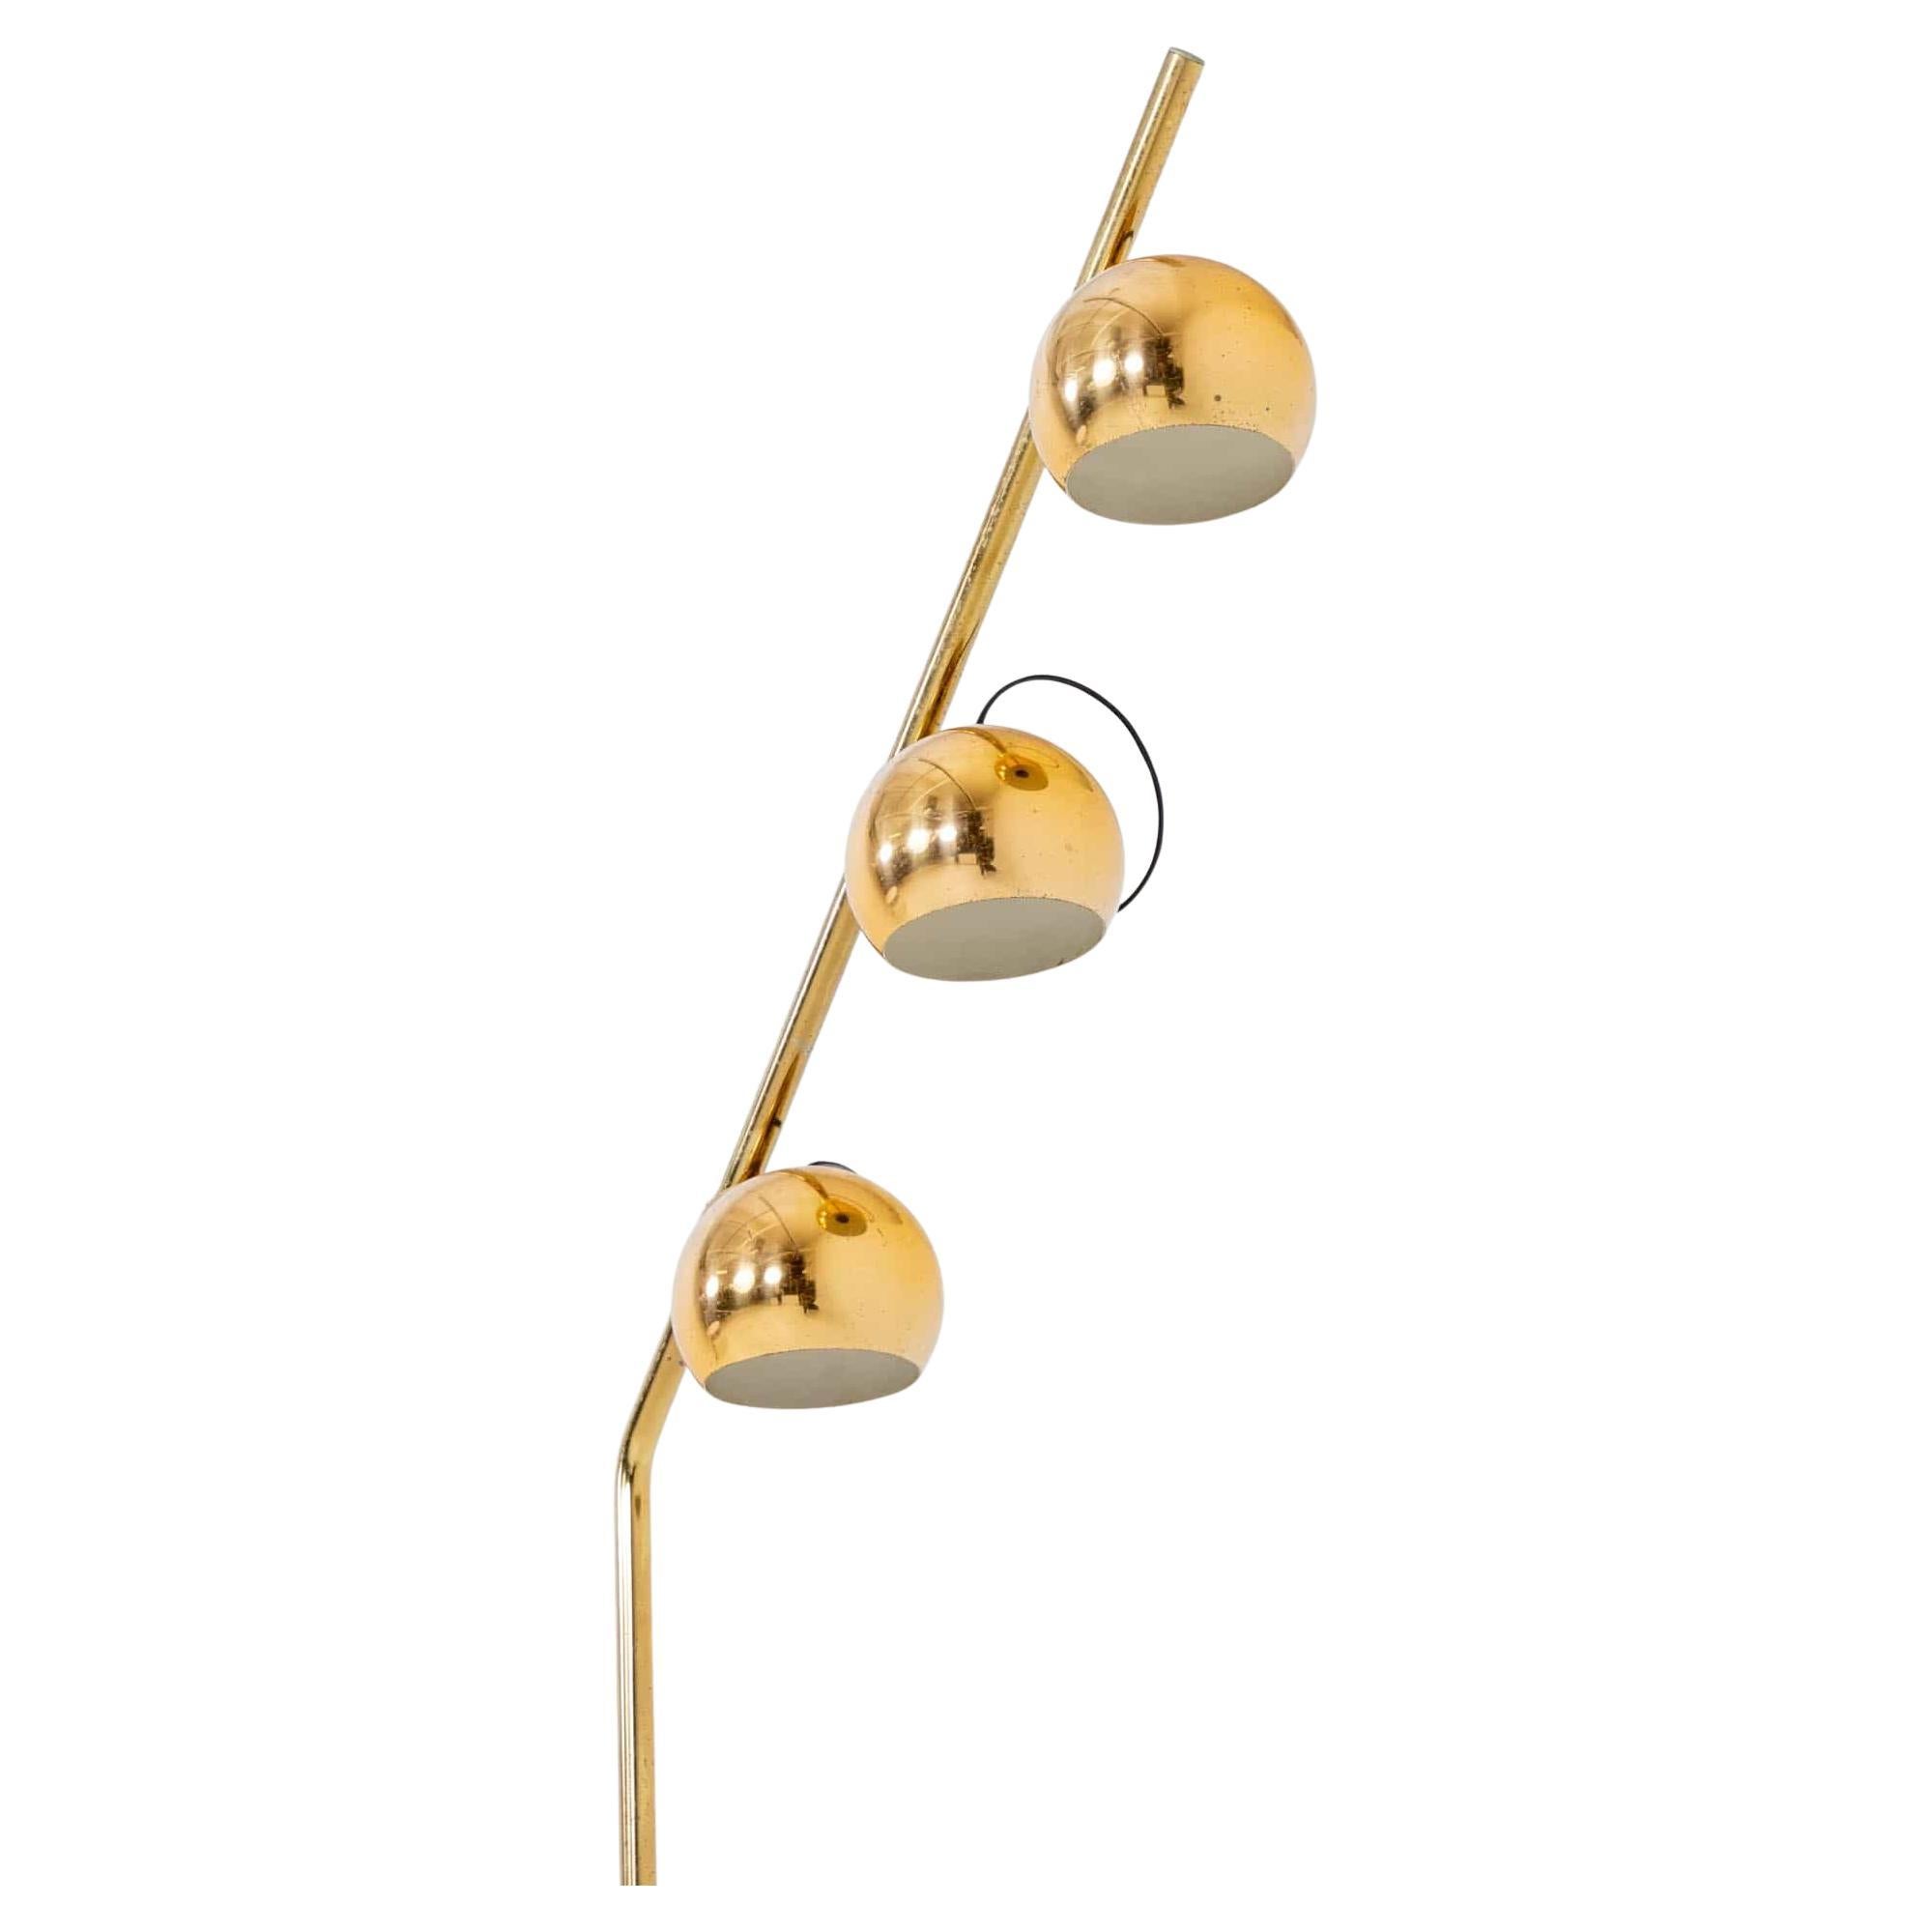 Golden floor lamp in polished brass with slender stem and three spherical lampshades.